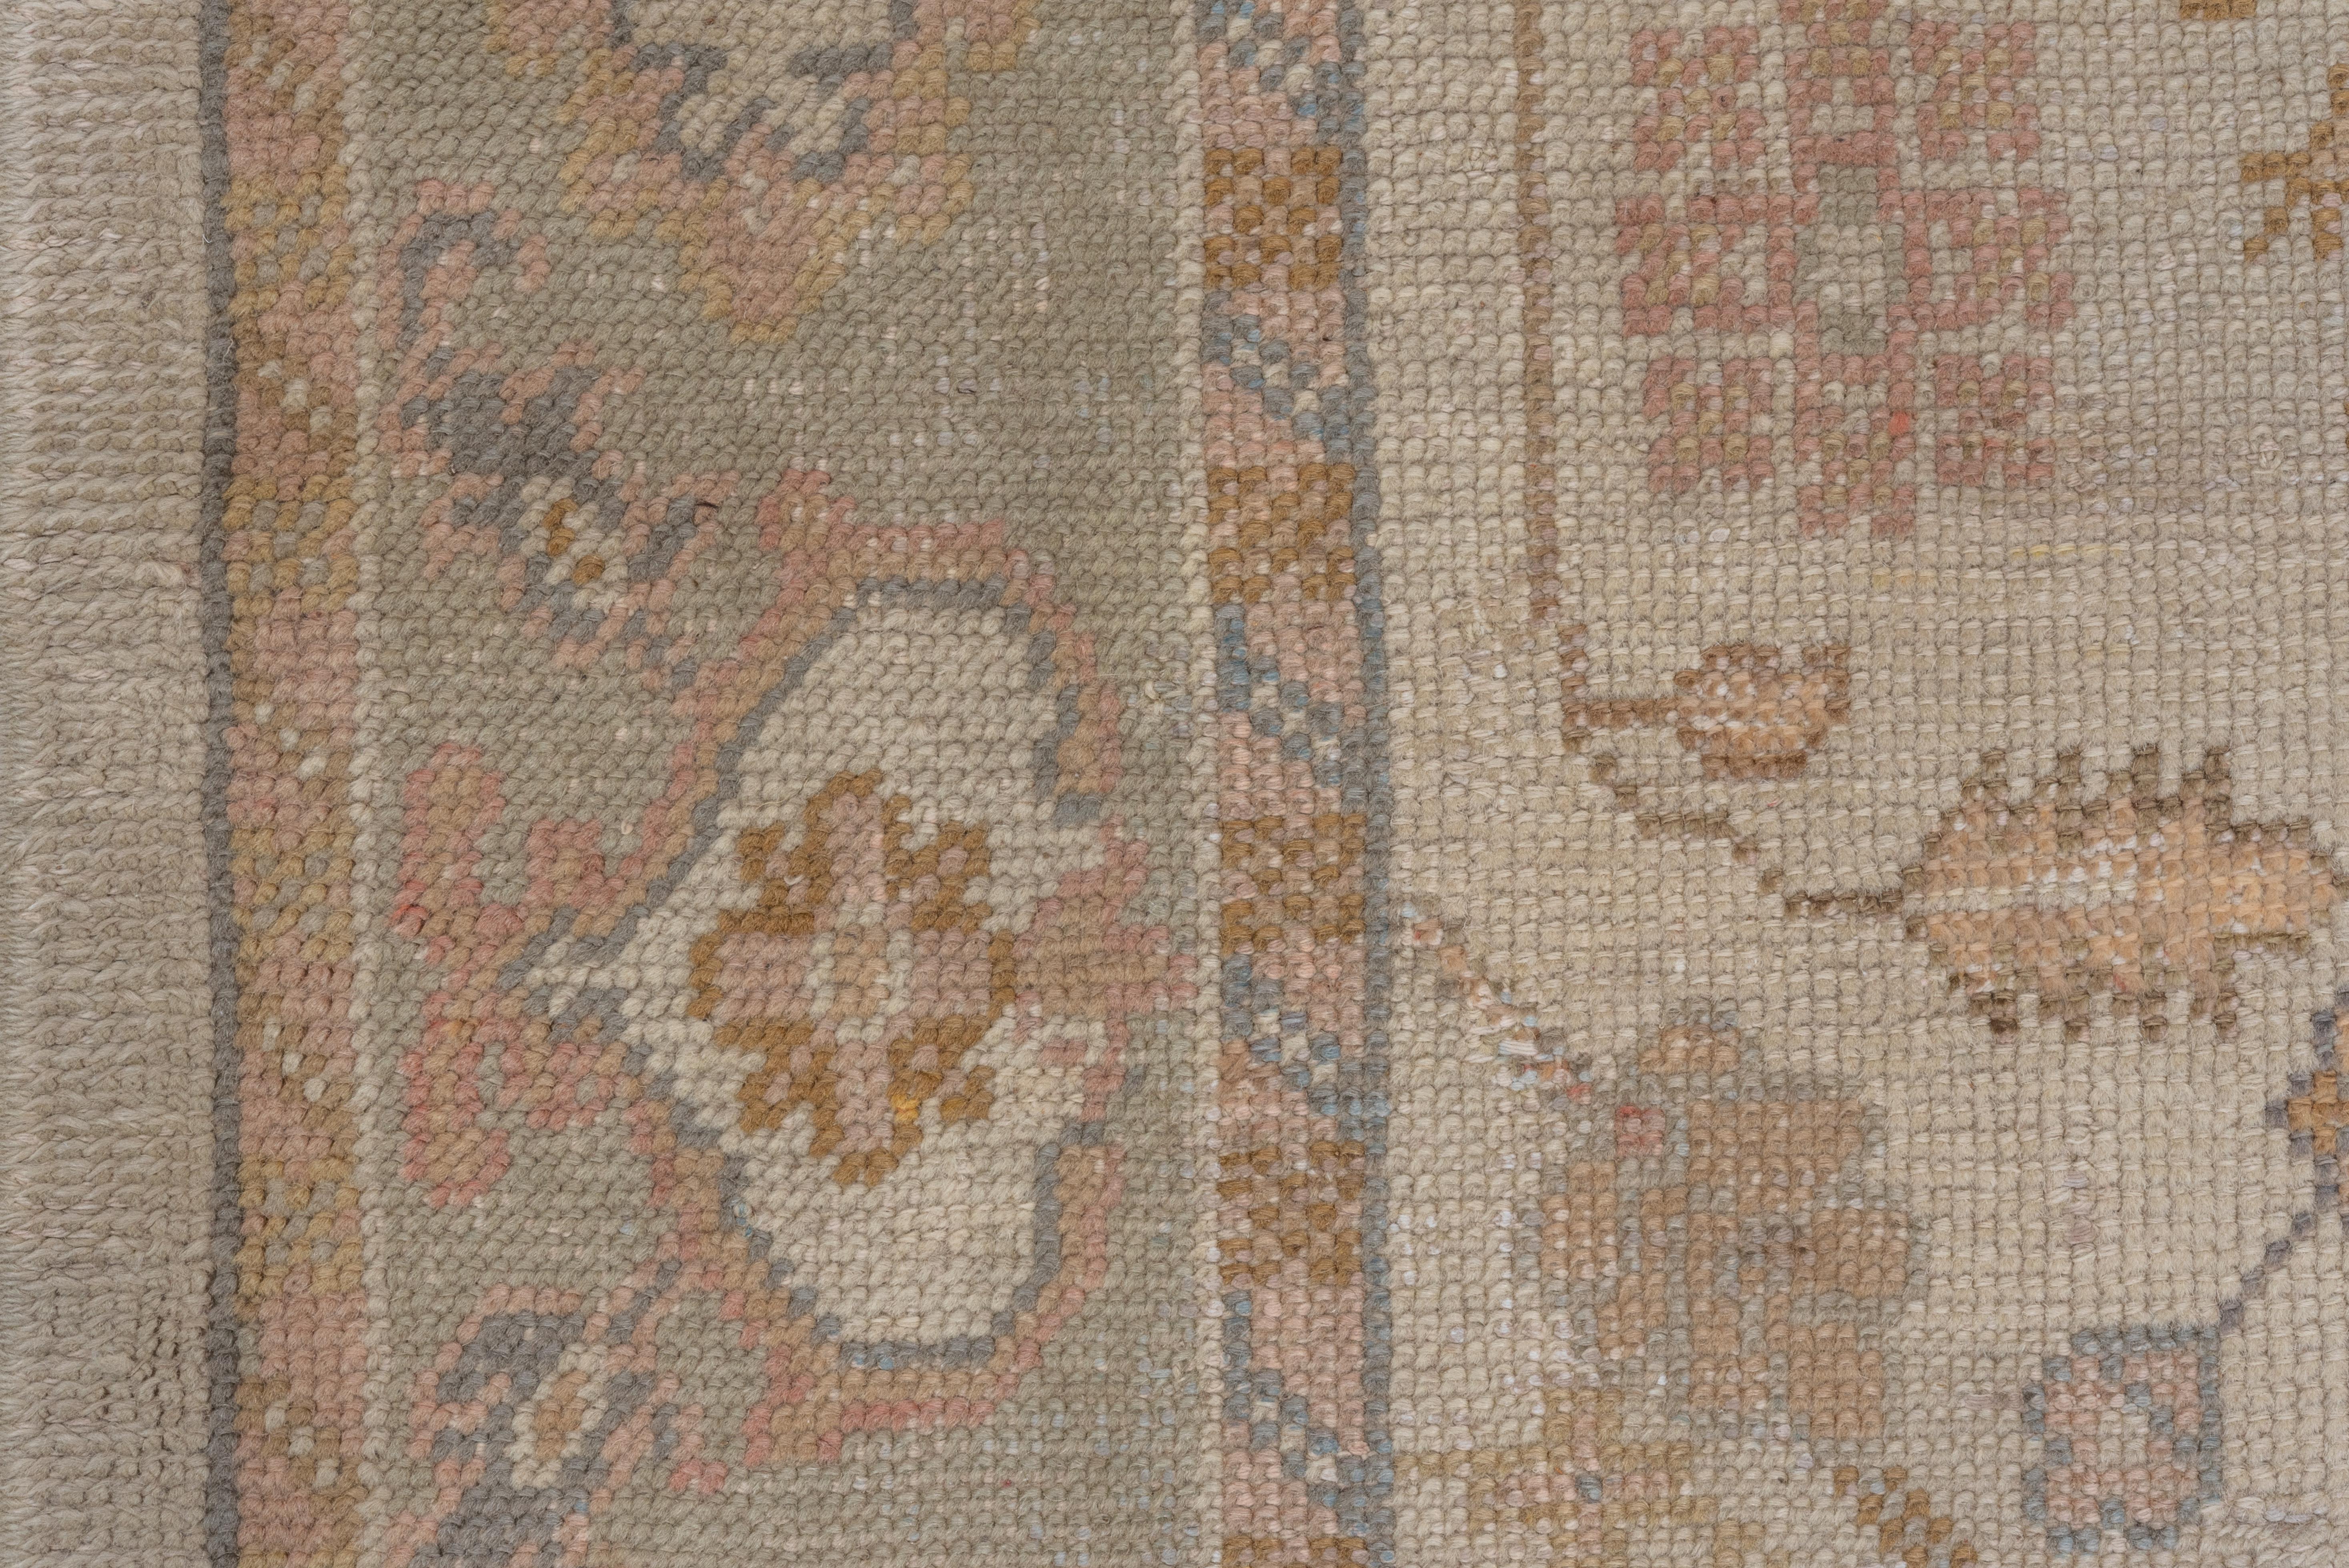 Off-Grey Floral Garden Turkish Rug In Good Condition For Sale In New York, NY